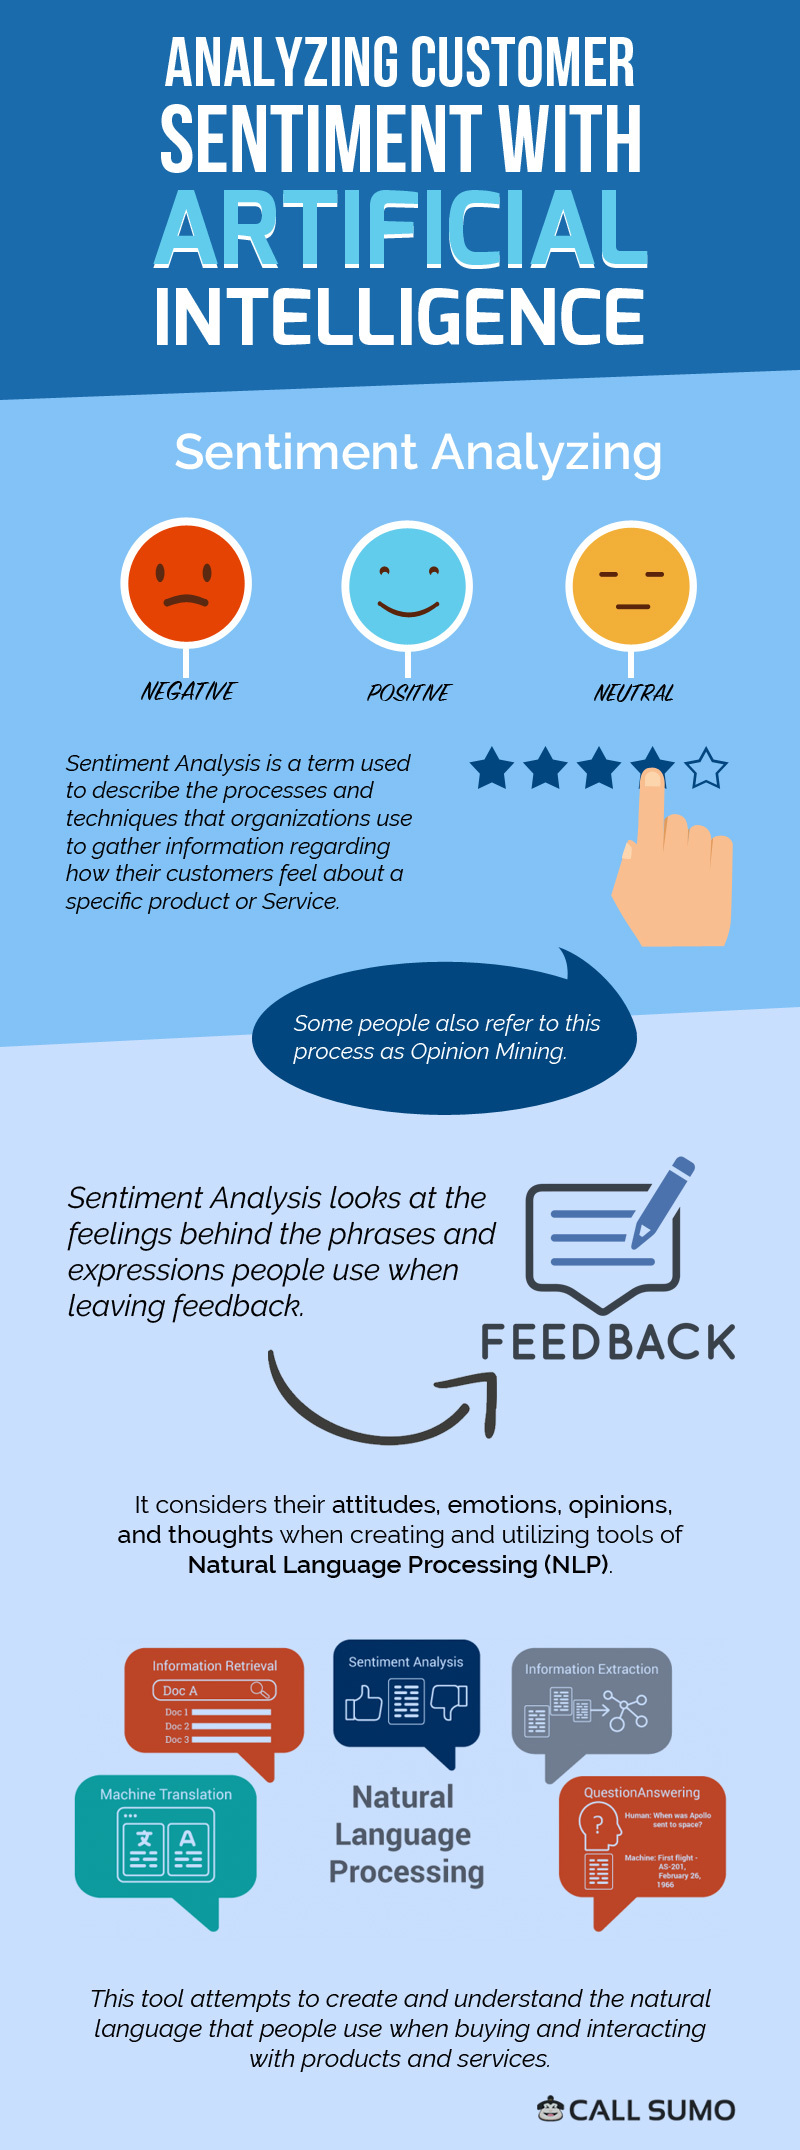 Analyzing Customer Sentiment with Artificial Intelligence